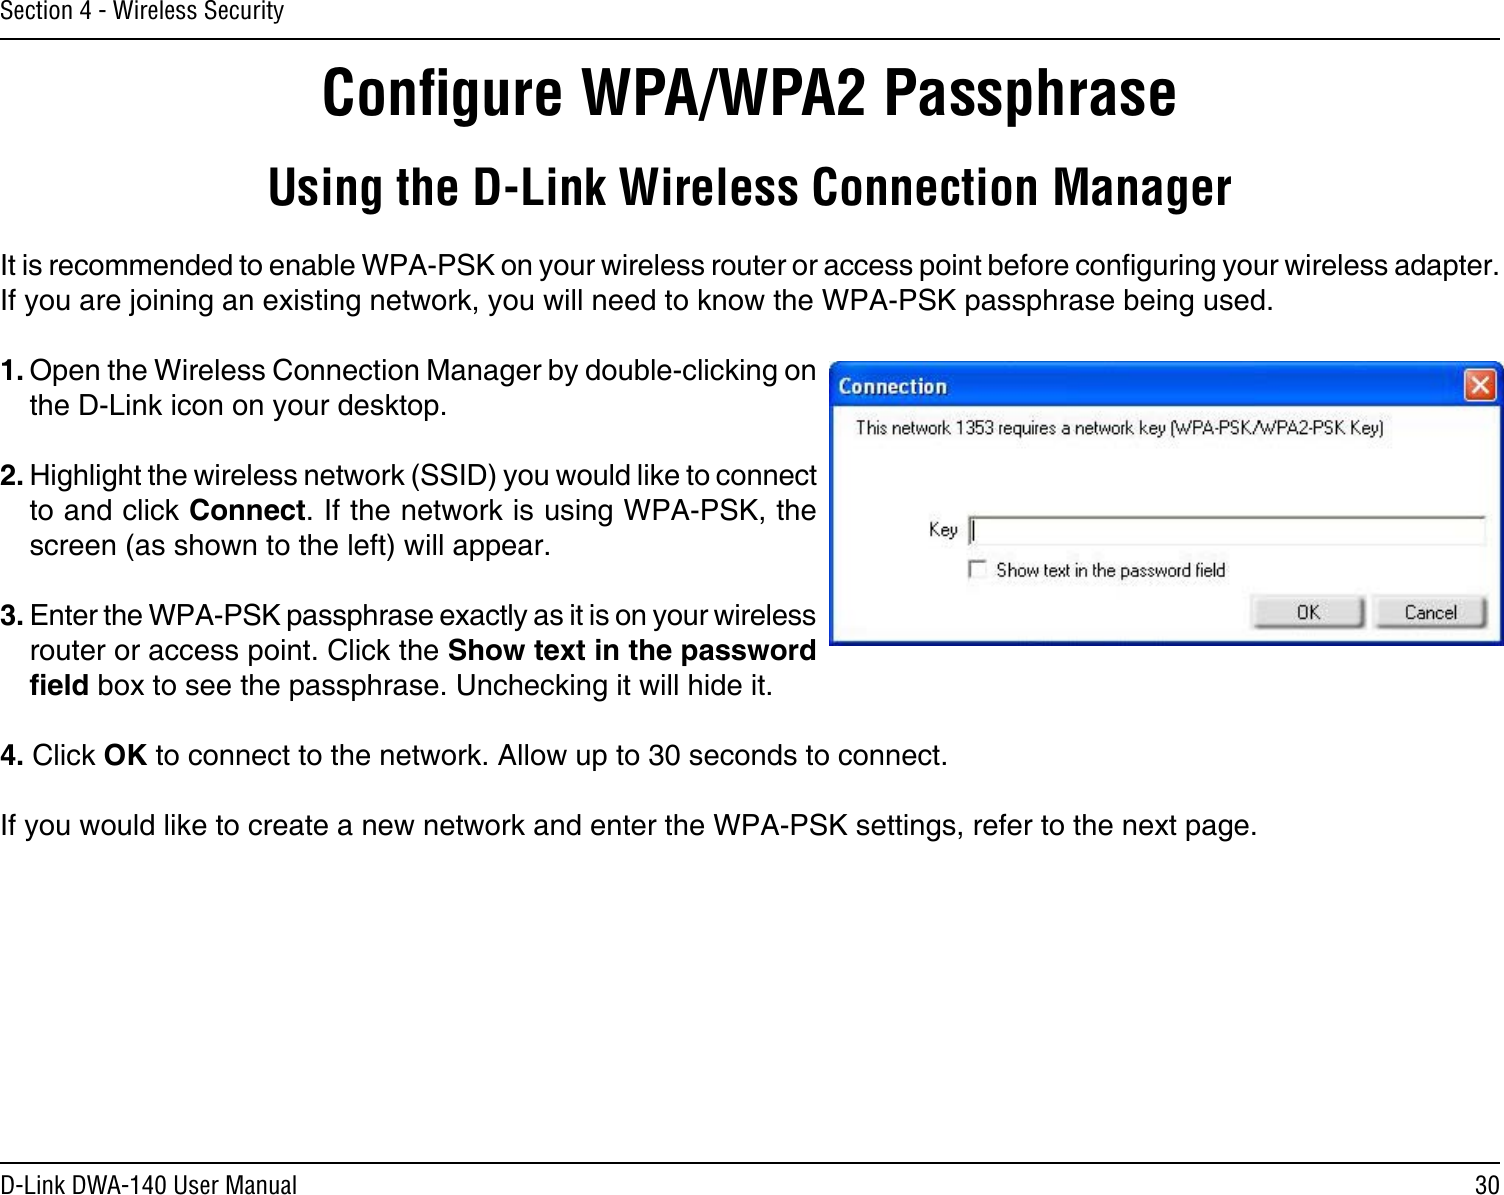 30D-Link DWA-140 User ManualSection 4 - Wireless SecurityConﬁgure WPA/WPA2 PassphraseUsing the D-Link Wireless Connection ManagerIt is recommended to enable WPA-PSK on your wireless router or access point before conguring your wireless adapter. If you are joining an existing network, you will need to know the WPA-PSK passphrase being used.1. Open the Wireless Connection Manager by double-clicking on the D-Link icon on your desktop. 2. Highlight the wireless network (SSID) you would like to connect to and click Connect. If the network is using WPA-PSK, the screen (as shown to the left) will appear. 3. Enter the WPA-PSK passphrase exactly as it is on your wireless router or access point. Click the Show text in the password eld box to see the passphrase. Unchecking it will hide it.4. Click OK to connect to the network. Allow up to 30 seconds to connect.If you would like to create a new network and enter the WPA-PSK settings, refer to the next page.